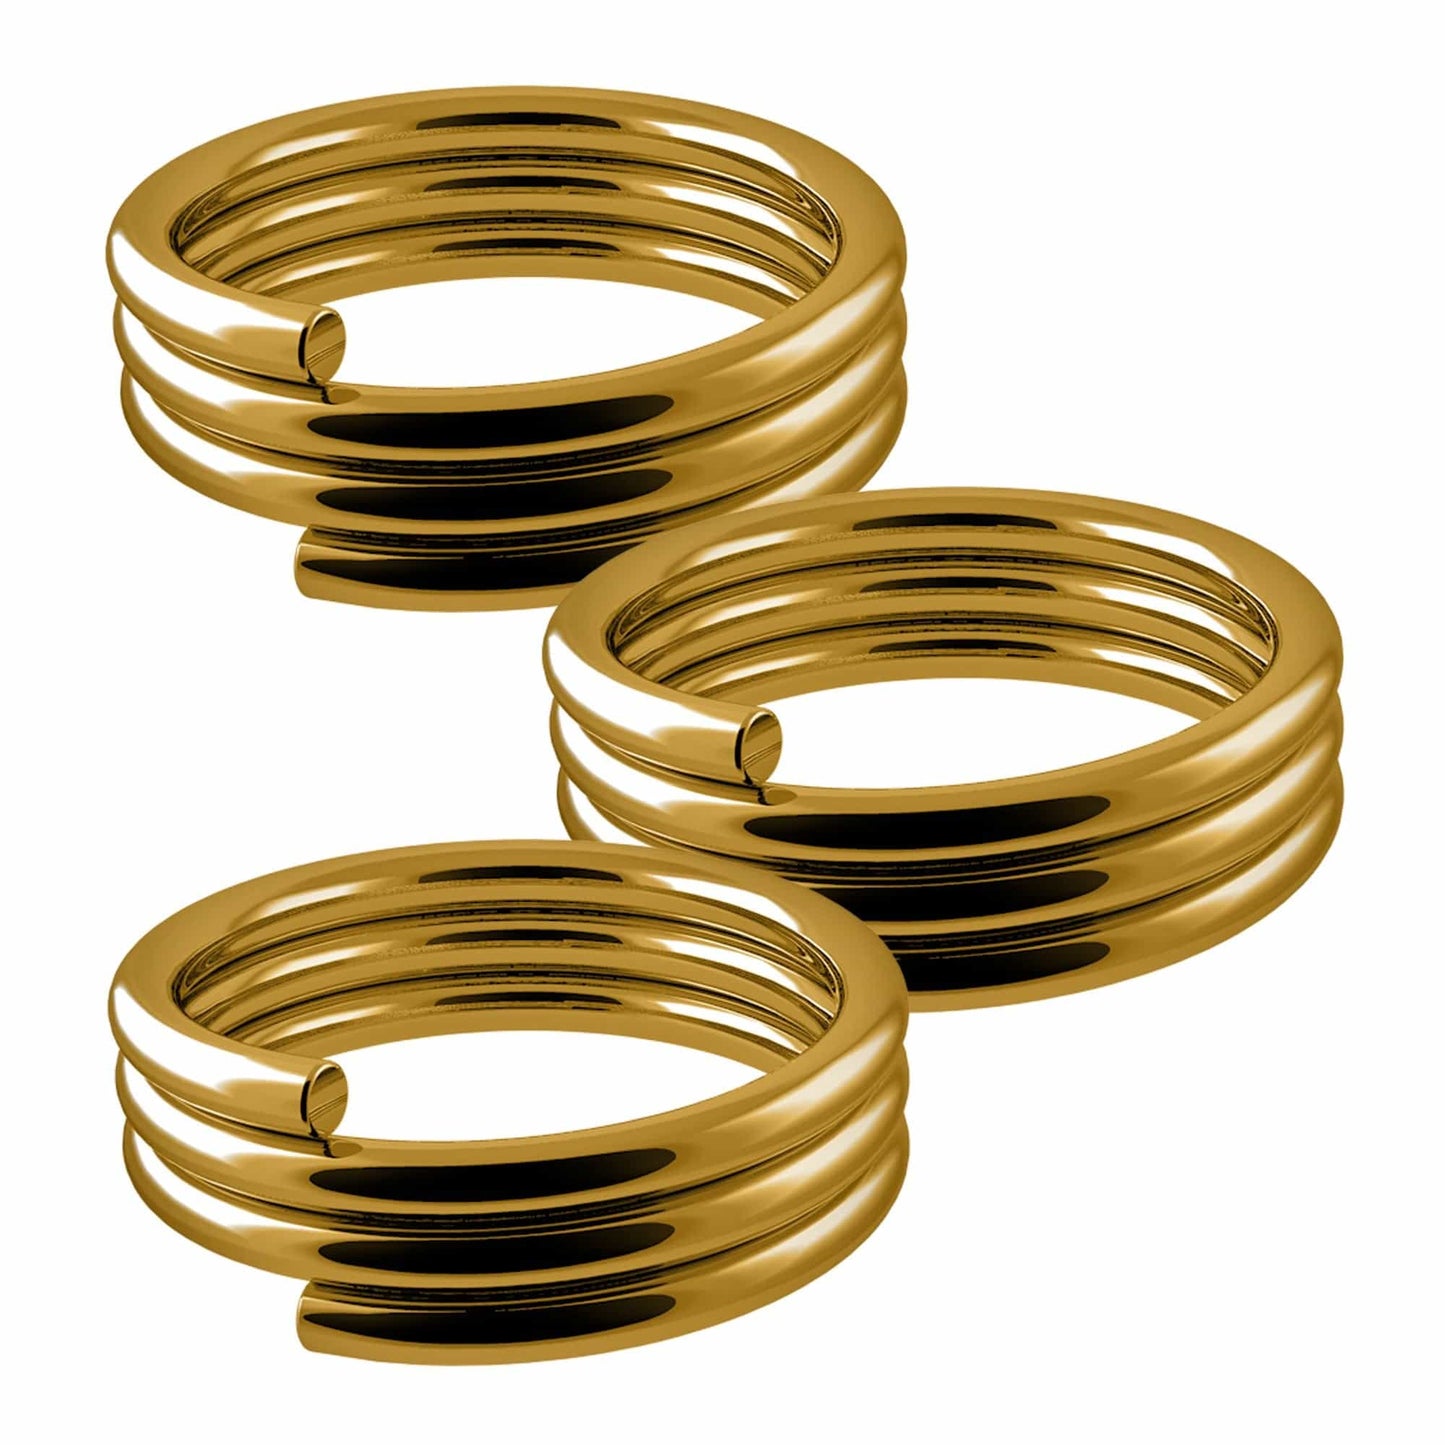 Designa Springs - for use with Nylon Shafts - 20 Sets (60) Gold